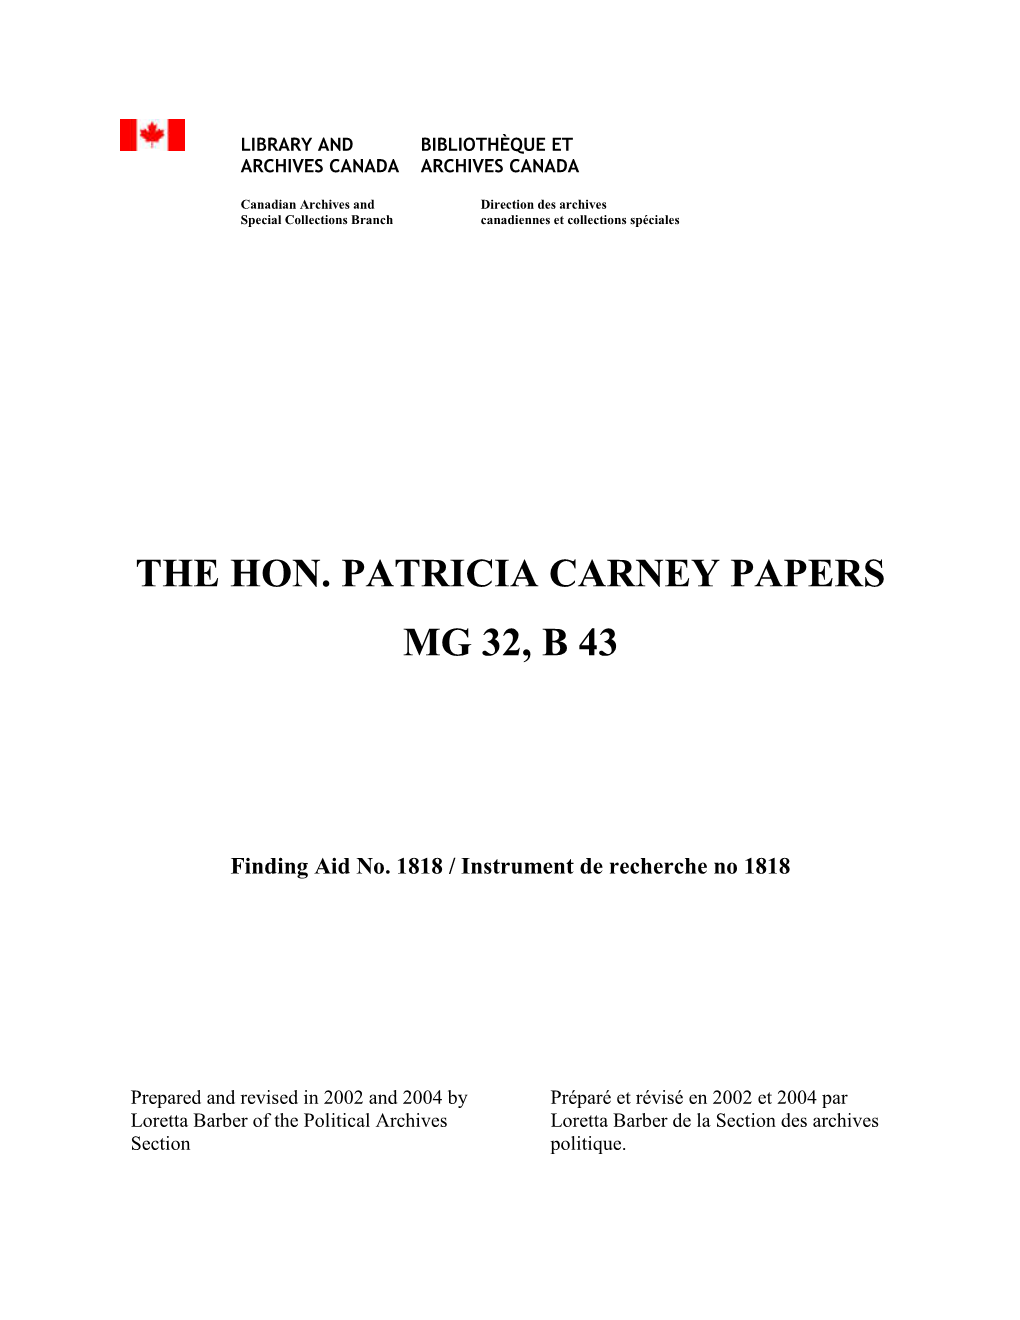 The Hon. Patricia Carney Papers Mg 32, B 43